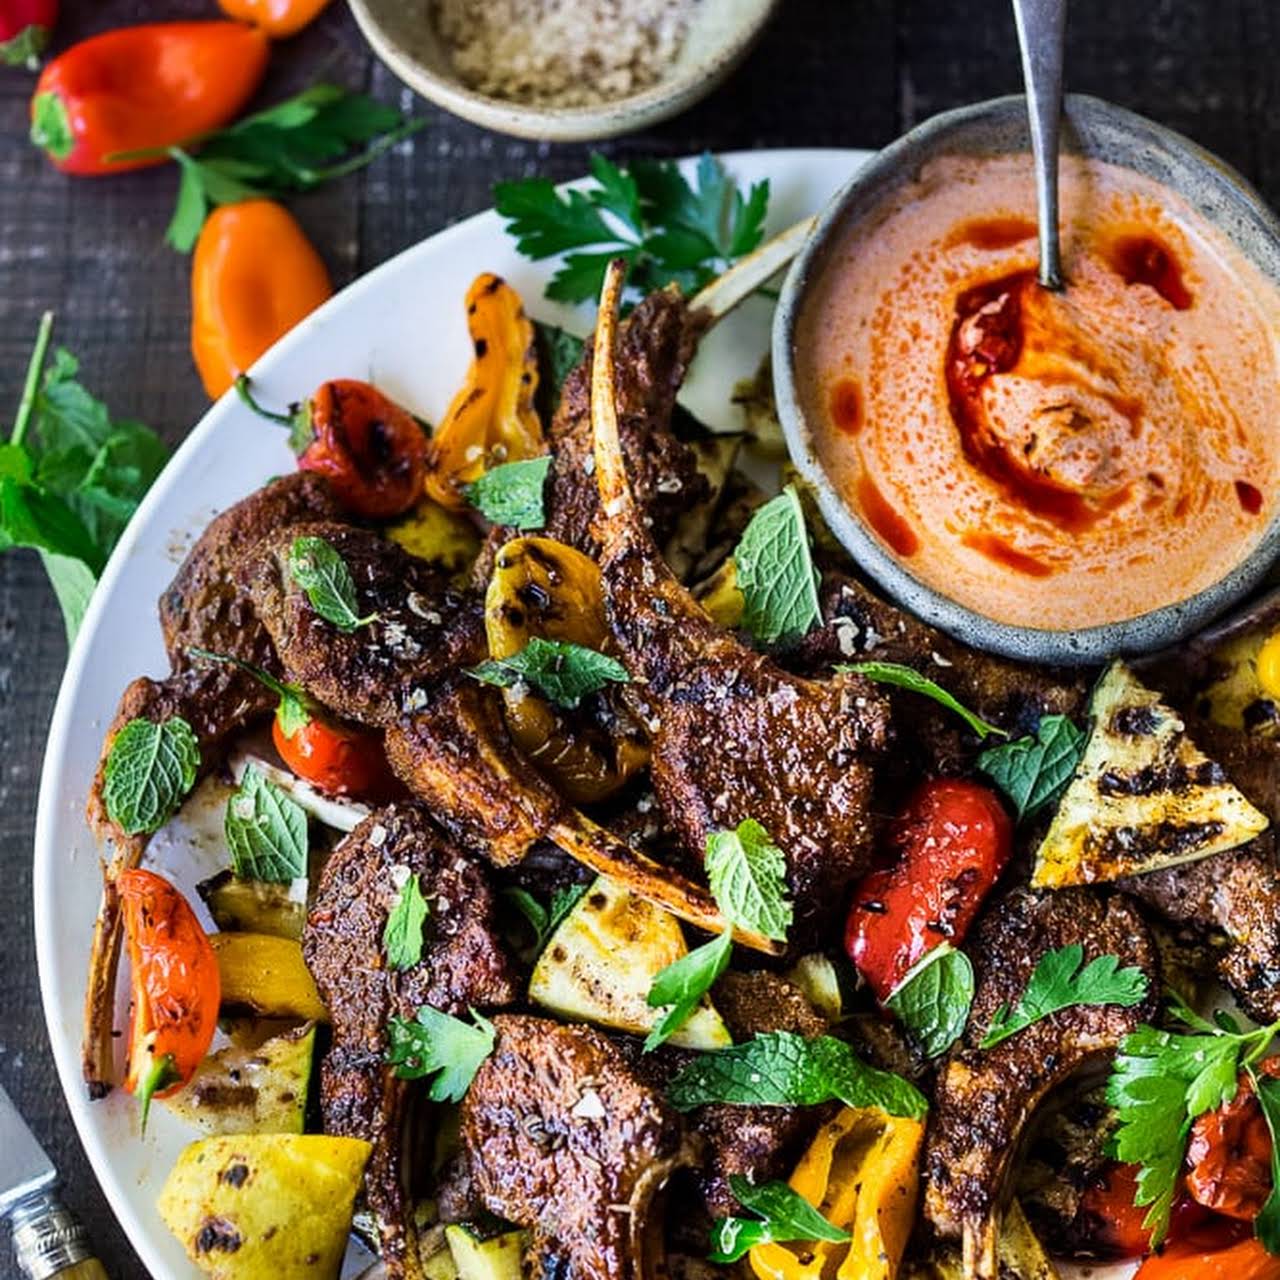 Grilled Lamb Chops - Immaculate Bites